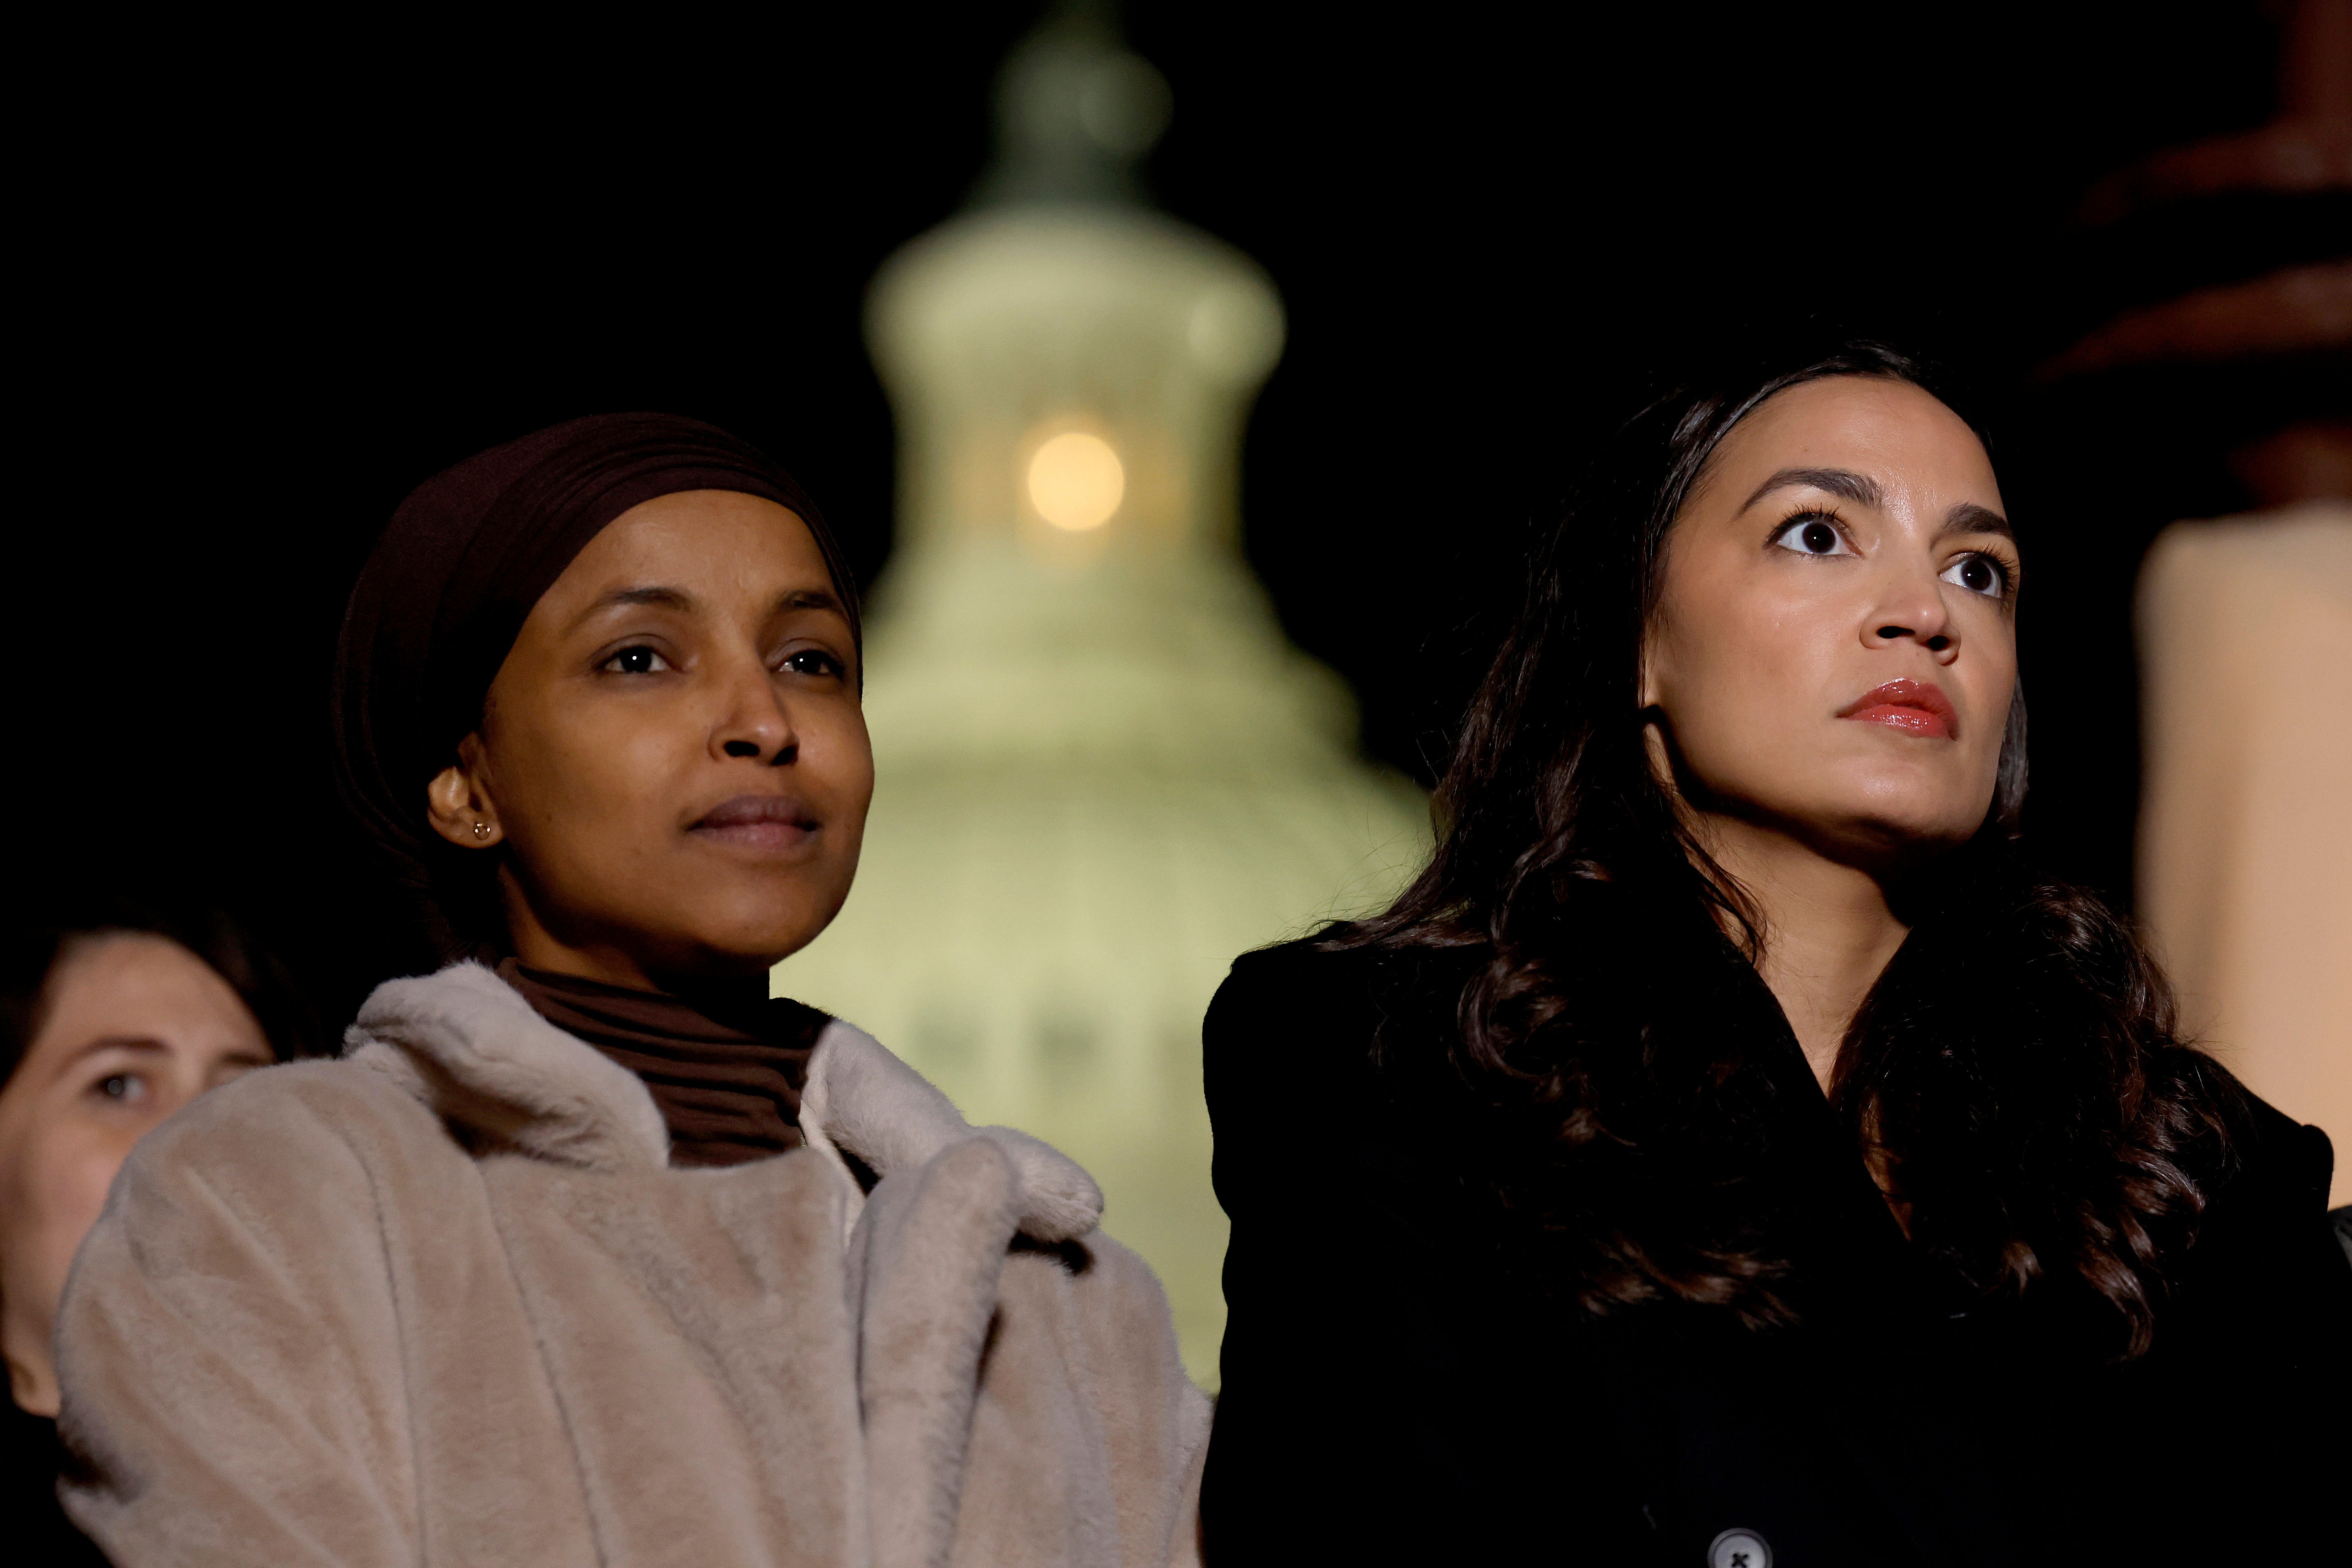 WASHINGTON, DC - NOVEMBER 13: (L-R) U.S. Rep. Ilhan Omar (D-MN) and Alexandria Ocasio-Cortez (D-NY) listen during a news conference calling for a ceasefire in Gaza outside the U.S. Capitol building on November 13, 2023 in Washington, DC. House Democrats held the news conference alongside rabbis with the activist group Jewish Voices for Peace. (Photo by Anna Moneymaker/Getty Images)